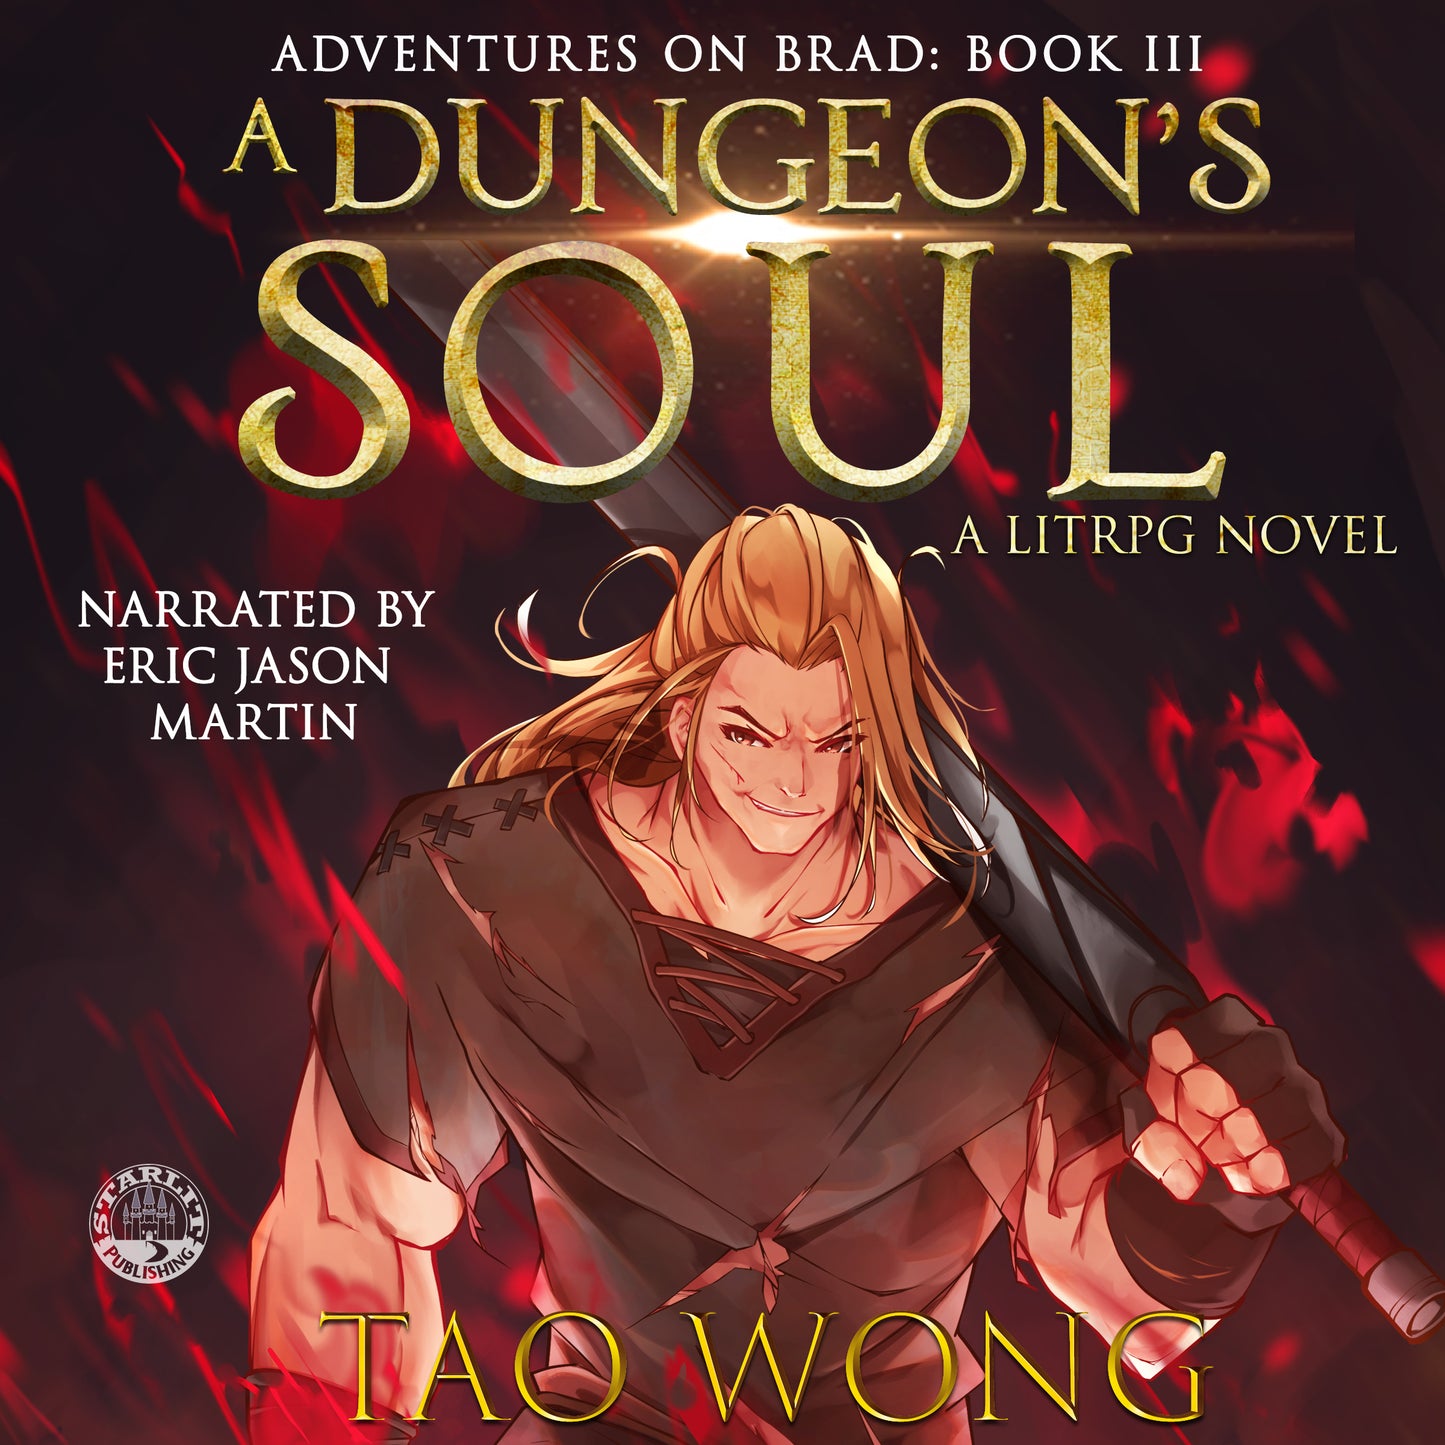 A Dungeon's Soul (Adventures on Brad #3)